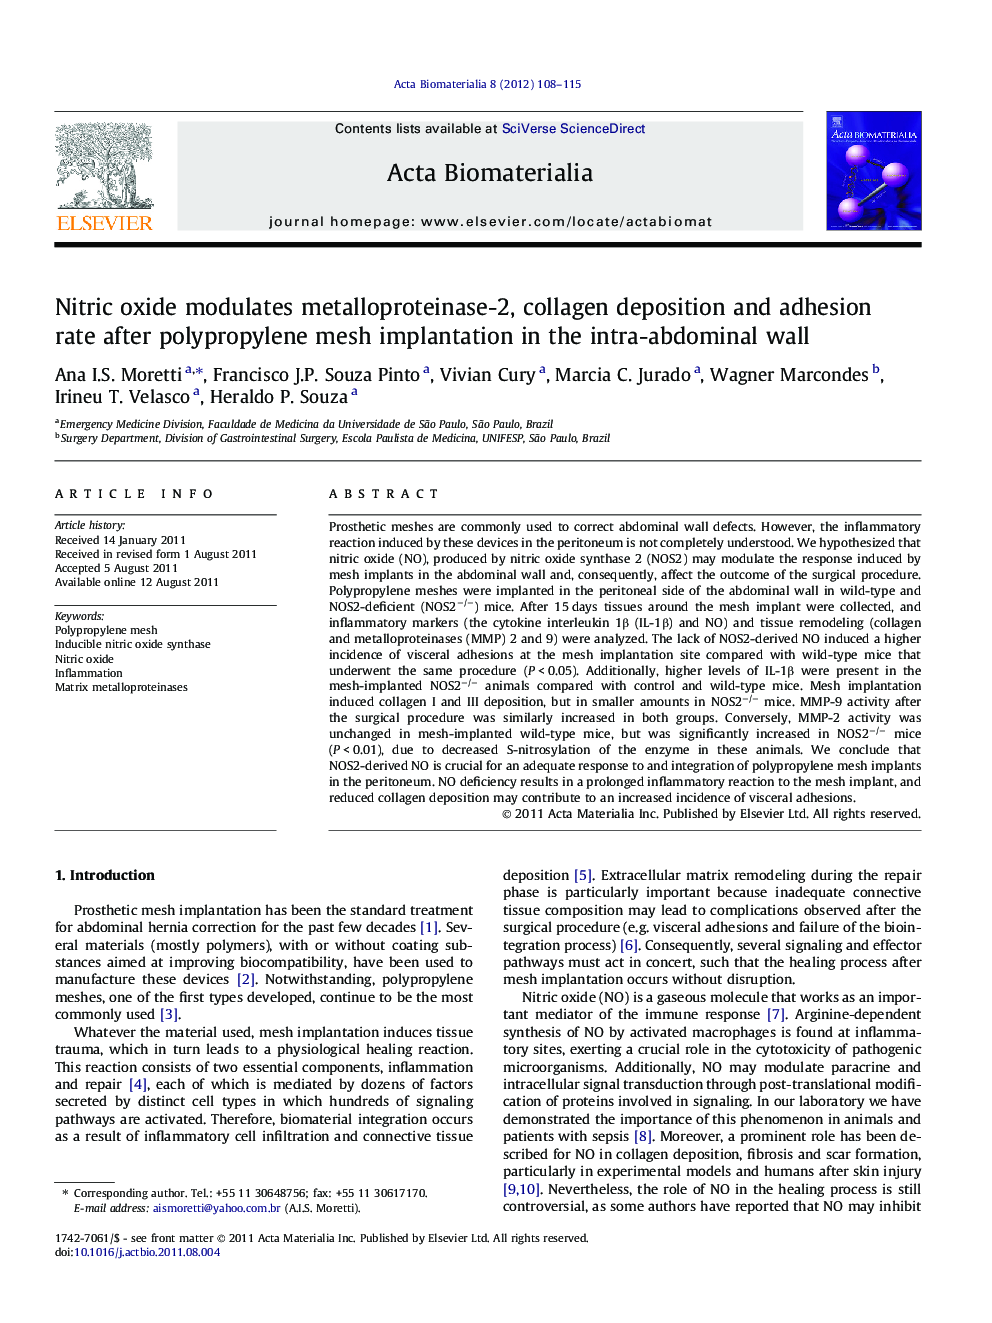 Nitric oxide modulates metalloproteinase-2, collagen deposition and adhesion rate after polypropylene mesh implantation in the intra-abdominal wall